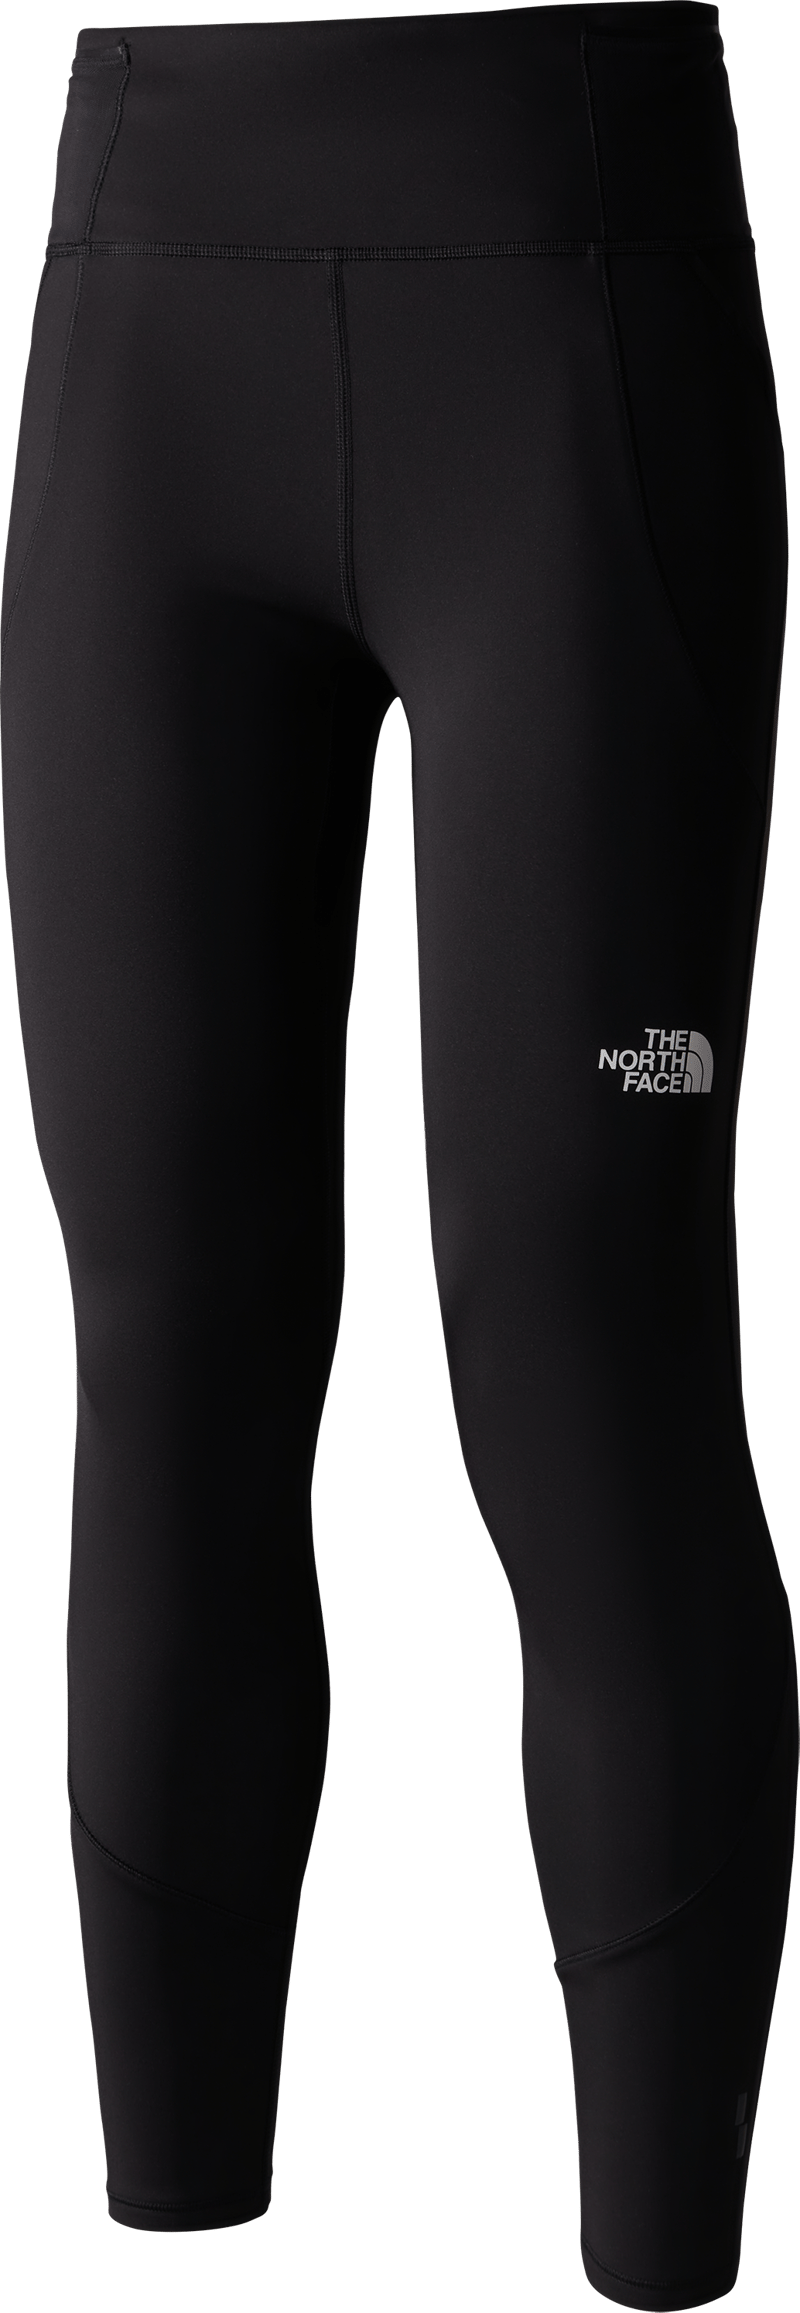 The North Face Winter Warm Tights Women